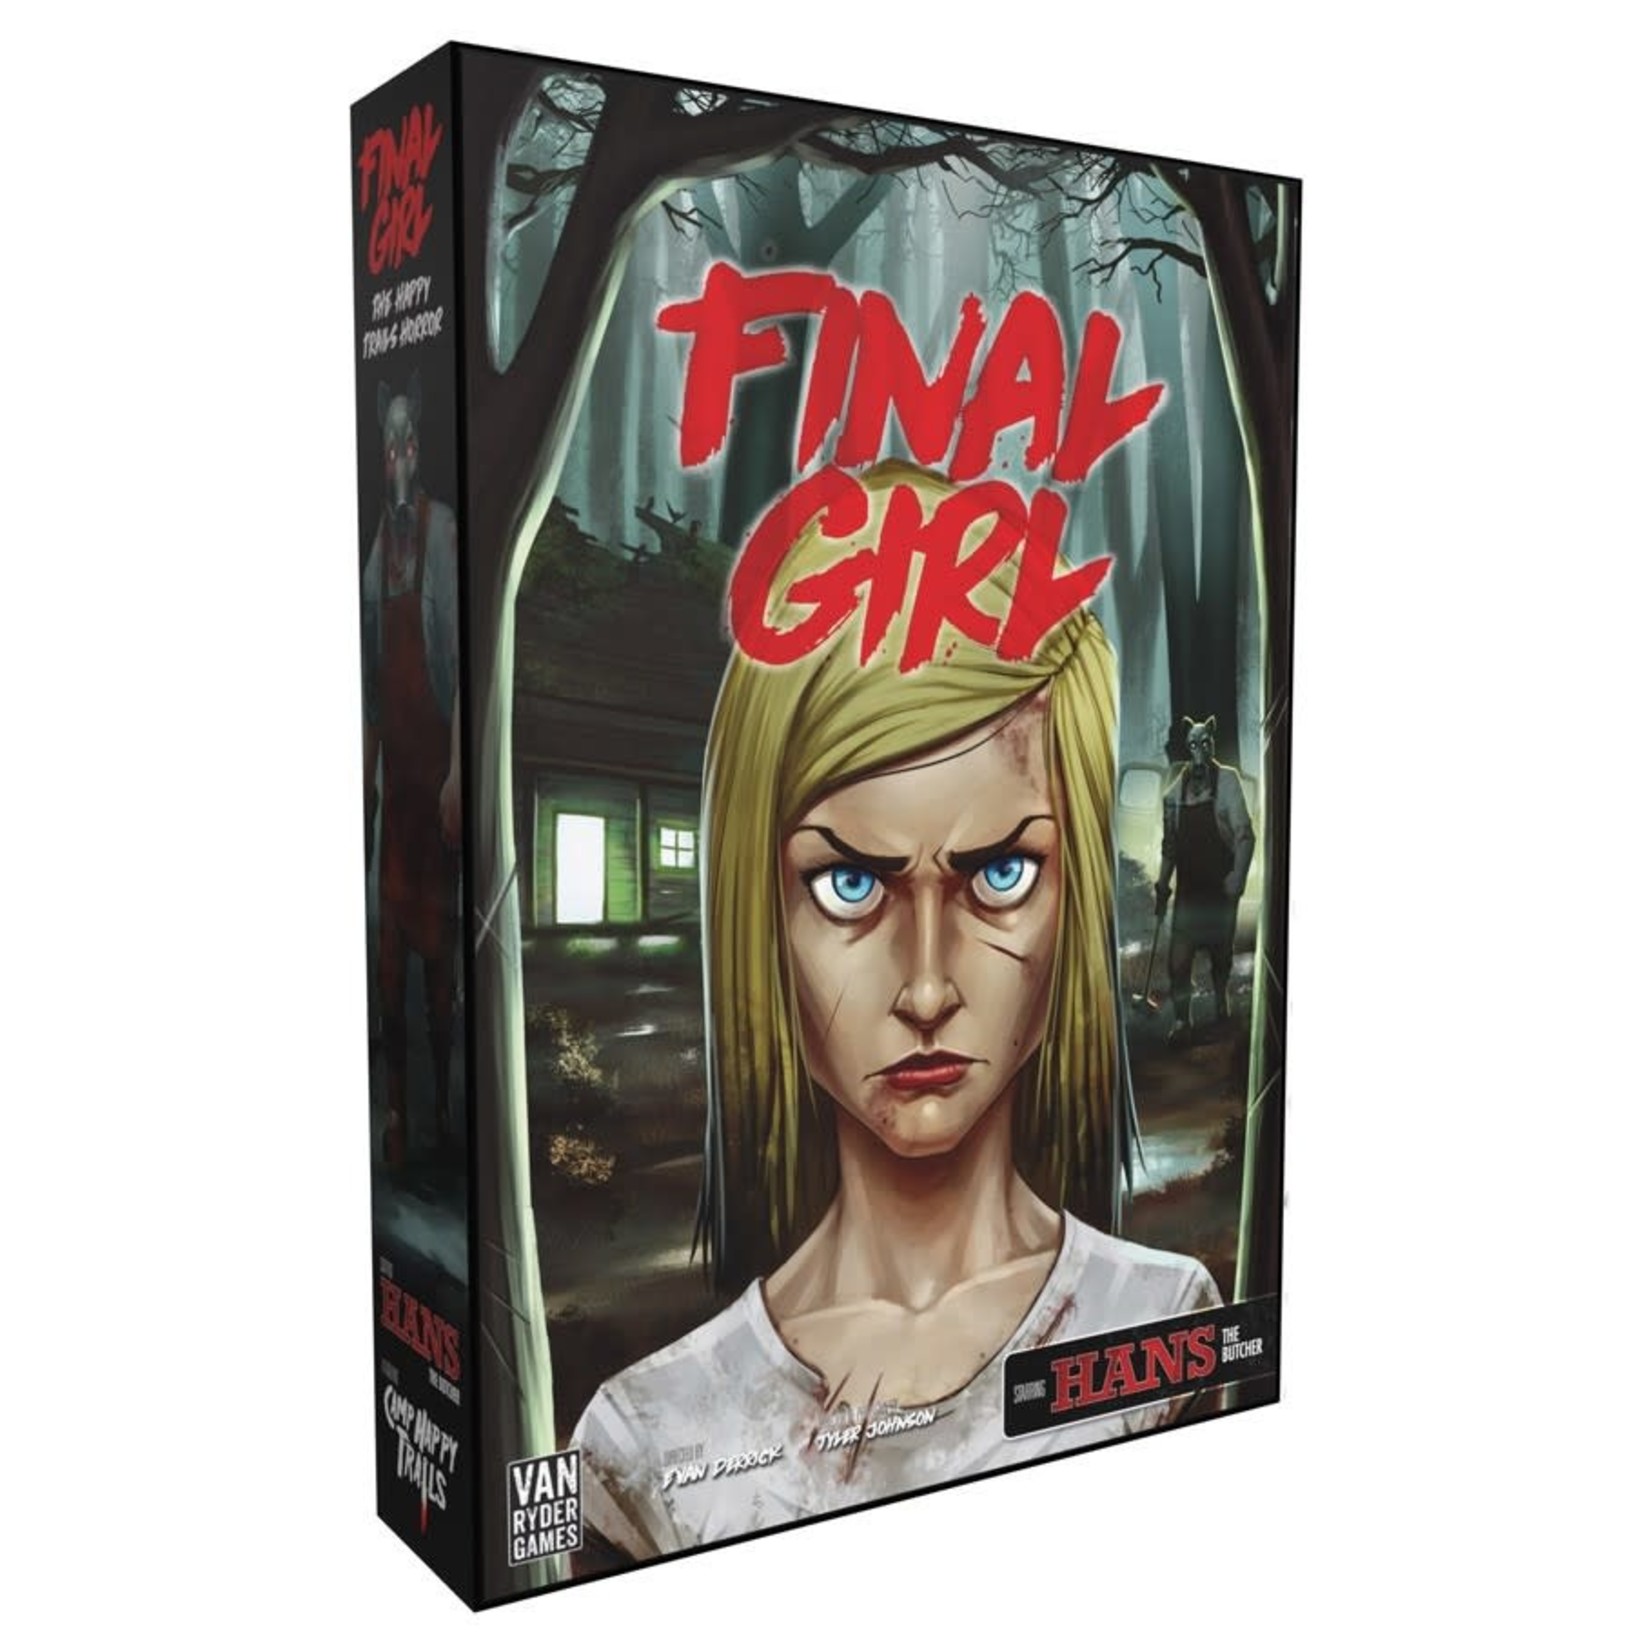 Van Ryder Games Final Girl: The Happy Trails Horror Feature Film Box